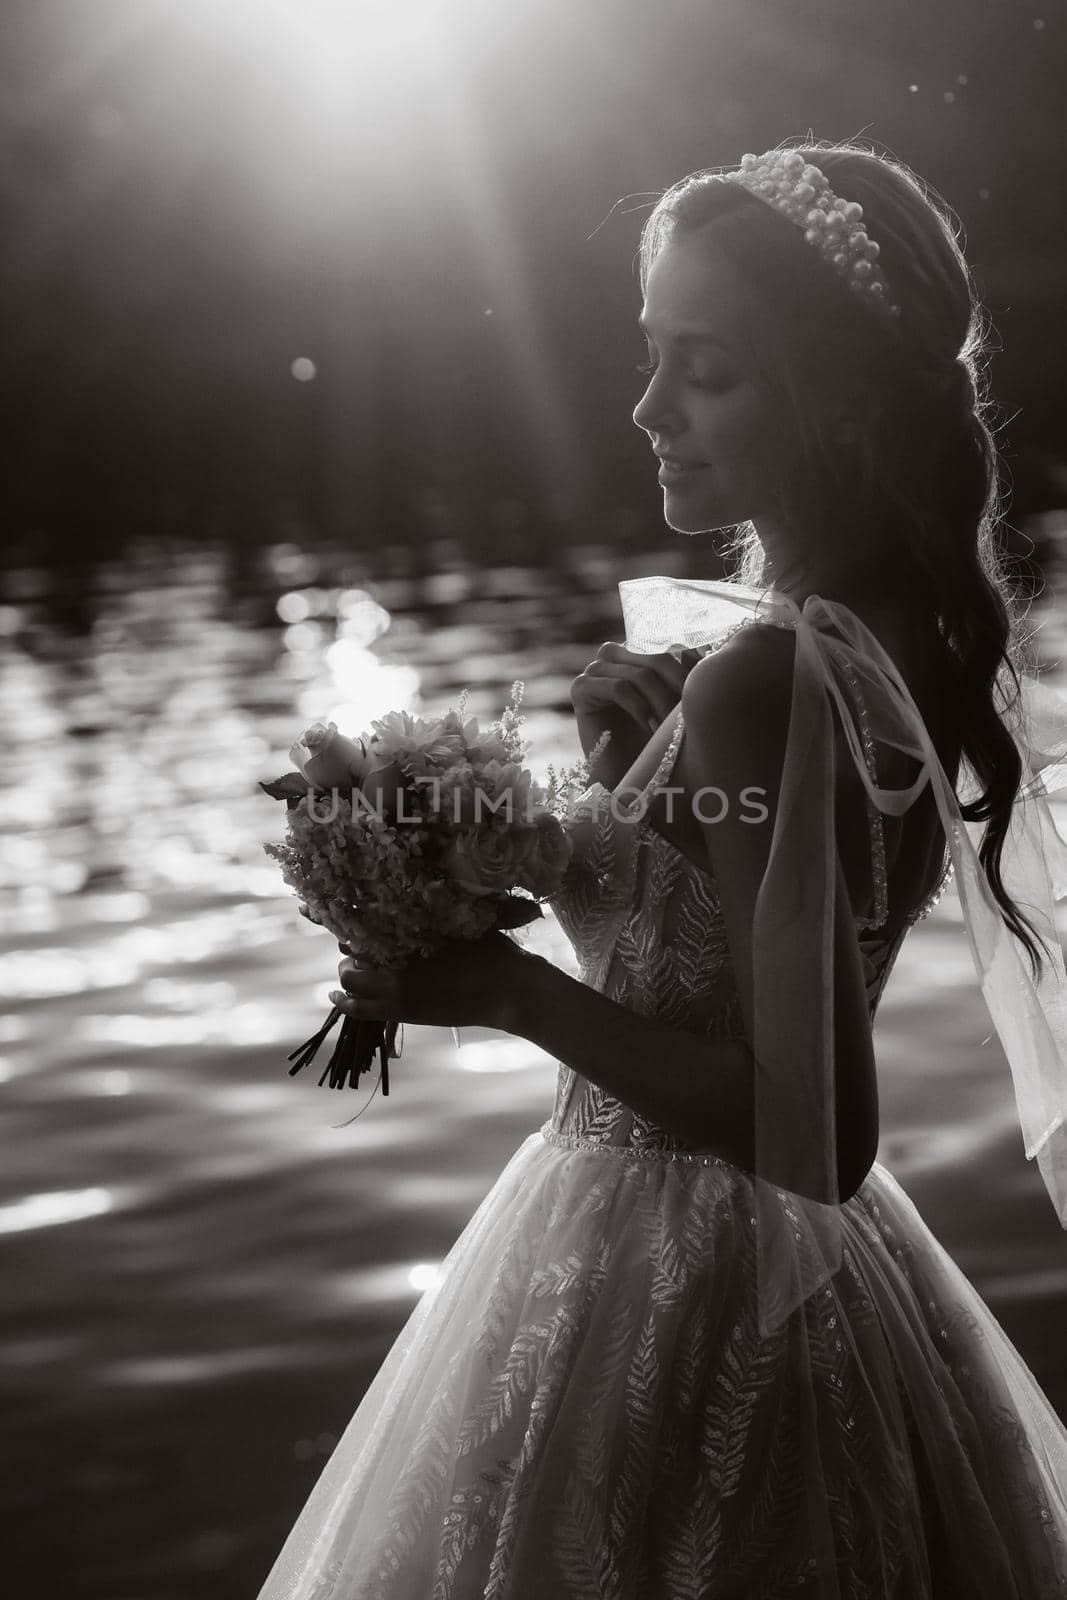 An elegant bride in a white dress and gloves stands by the river in the Park with a bouquet, enjoying nature at sunset.A model in a wedding dress and gloves in a nature Park.Belarus. black and white photo